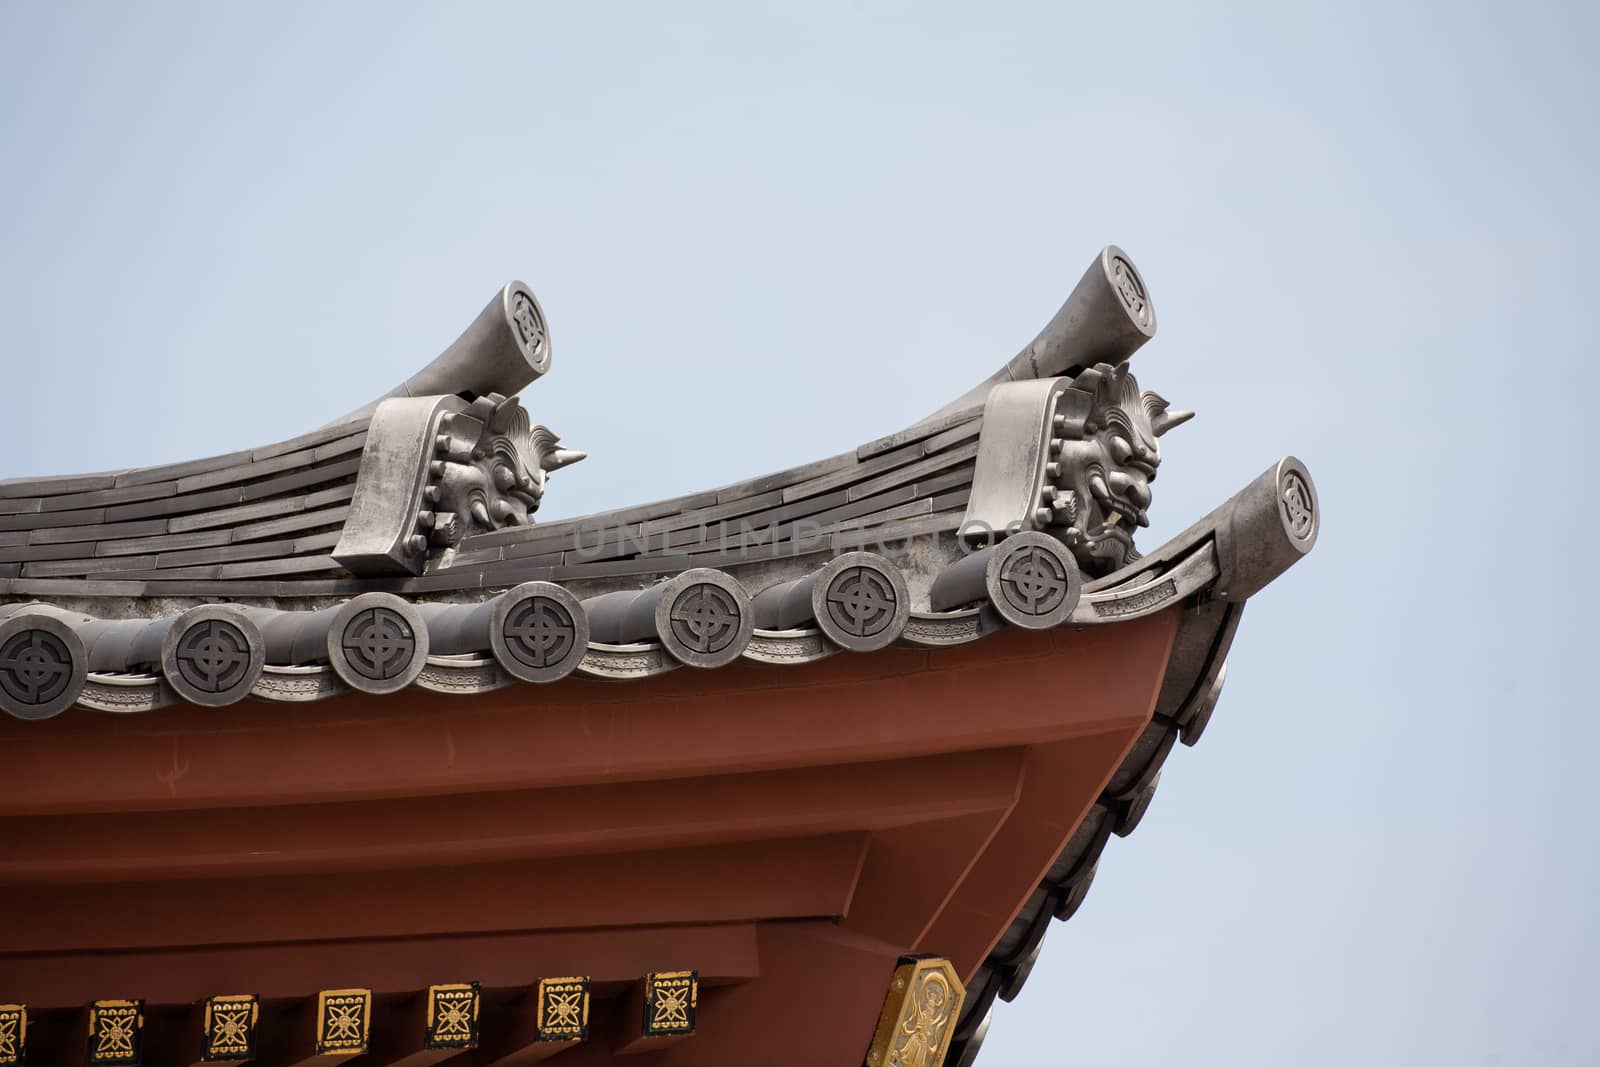 Detail on japanese temple roof against blue sky. by 2nix